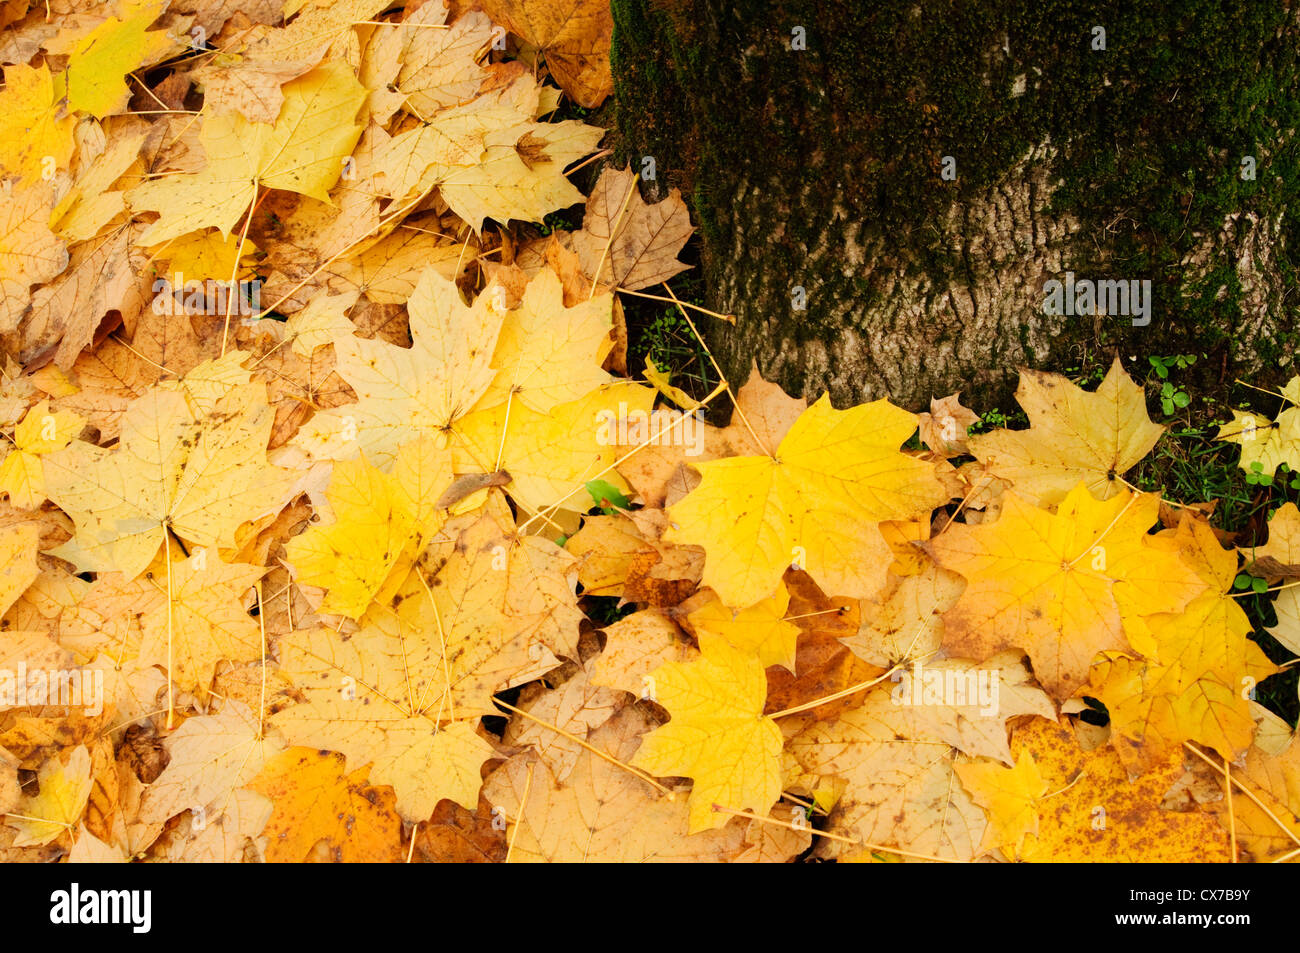 Italy, Lombardy, Park in Autumn, Yellow Leaves Stock Photo